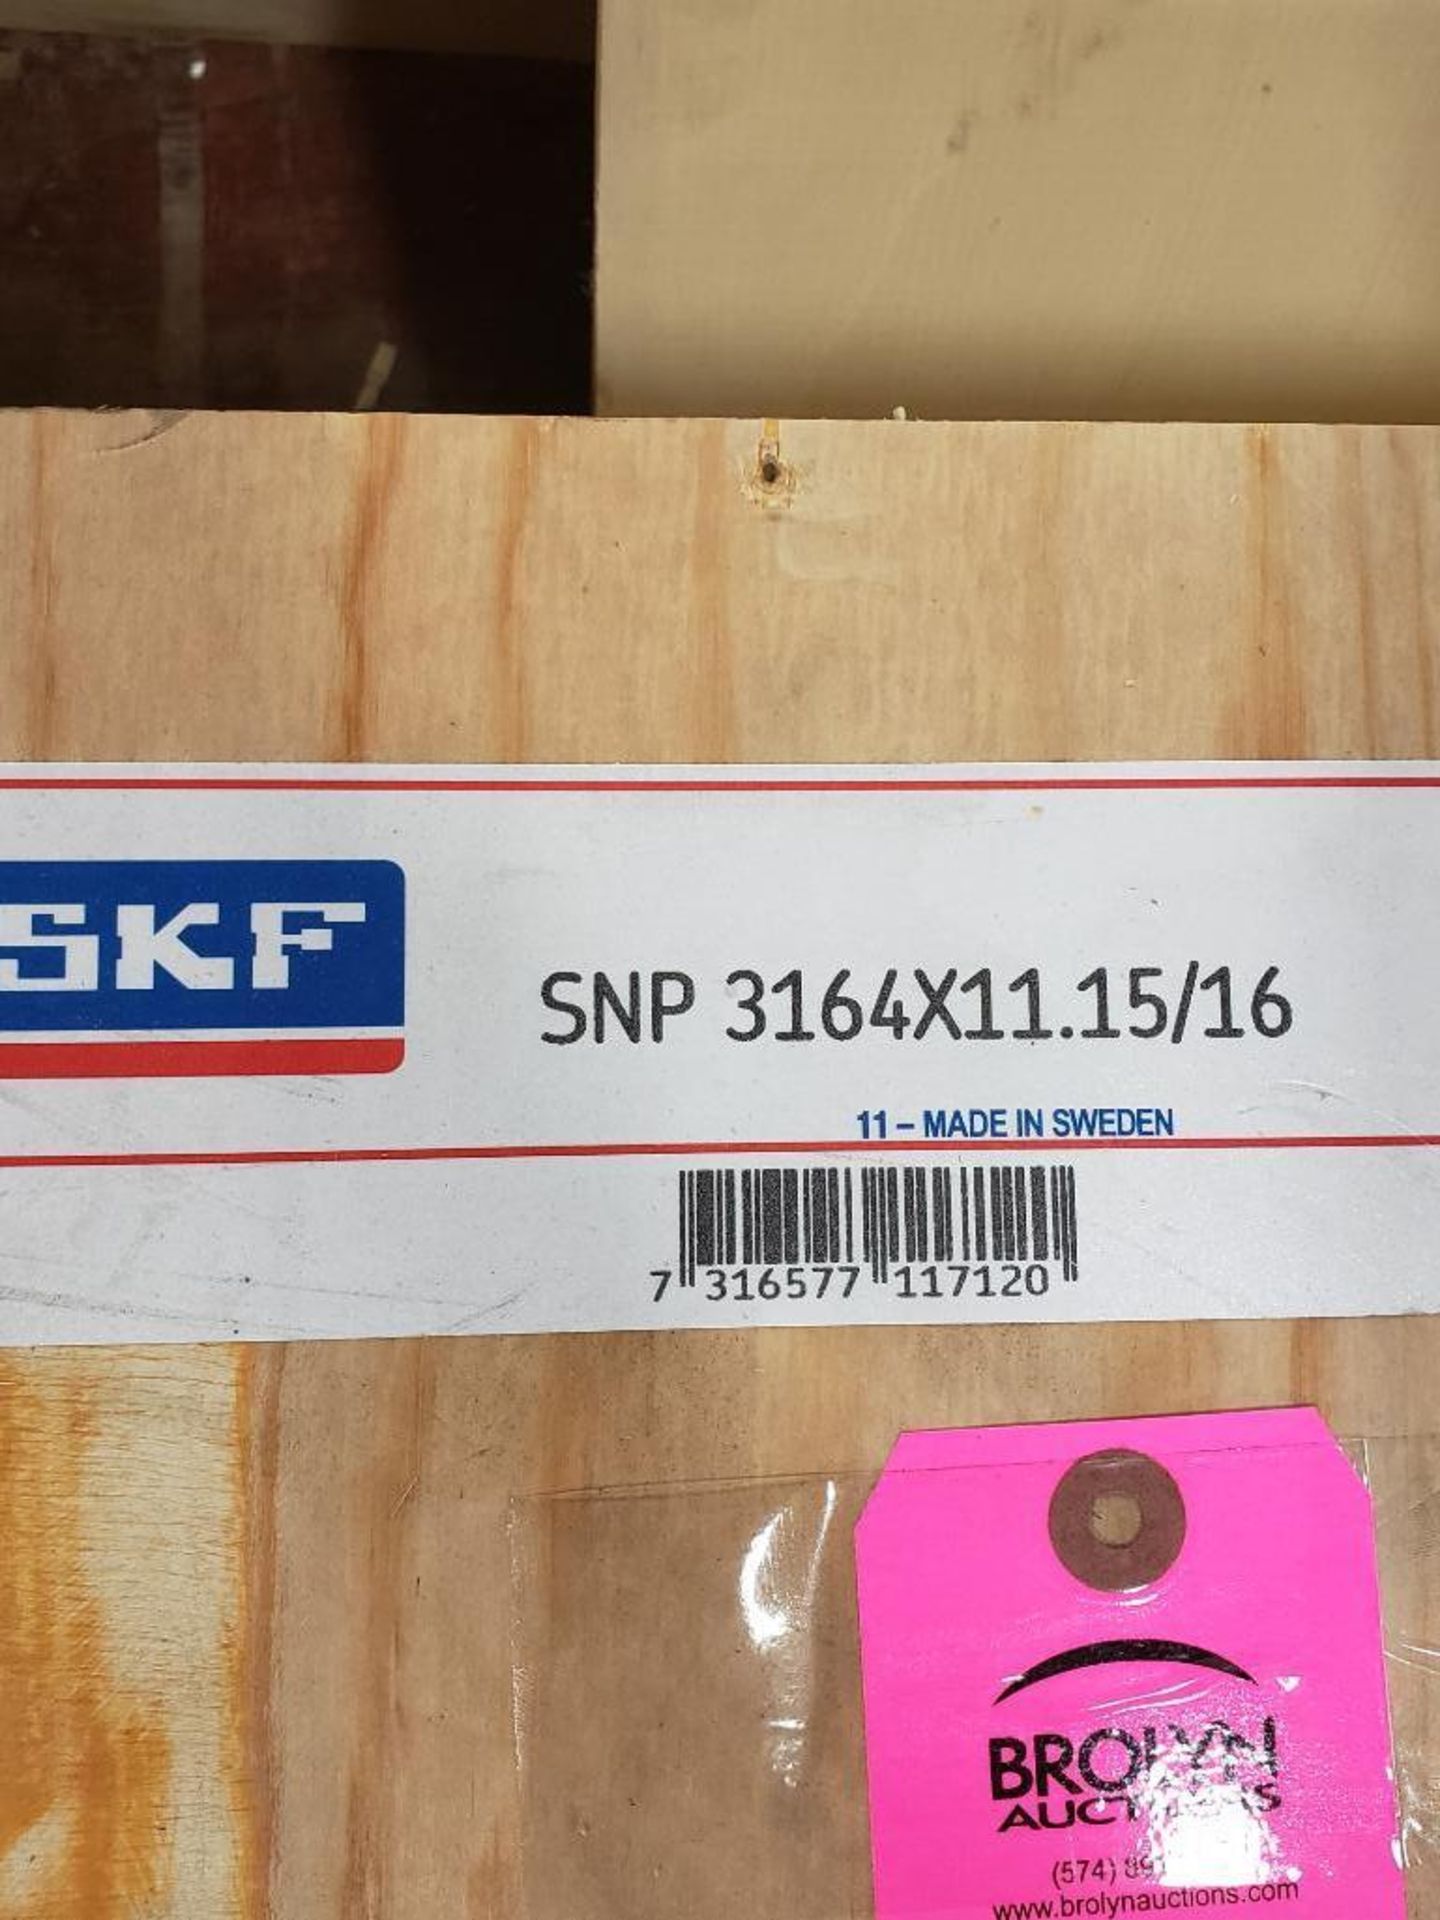 SKF model SNP-3164X11.15/16. New in crate. - Image 2 of 2